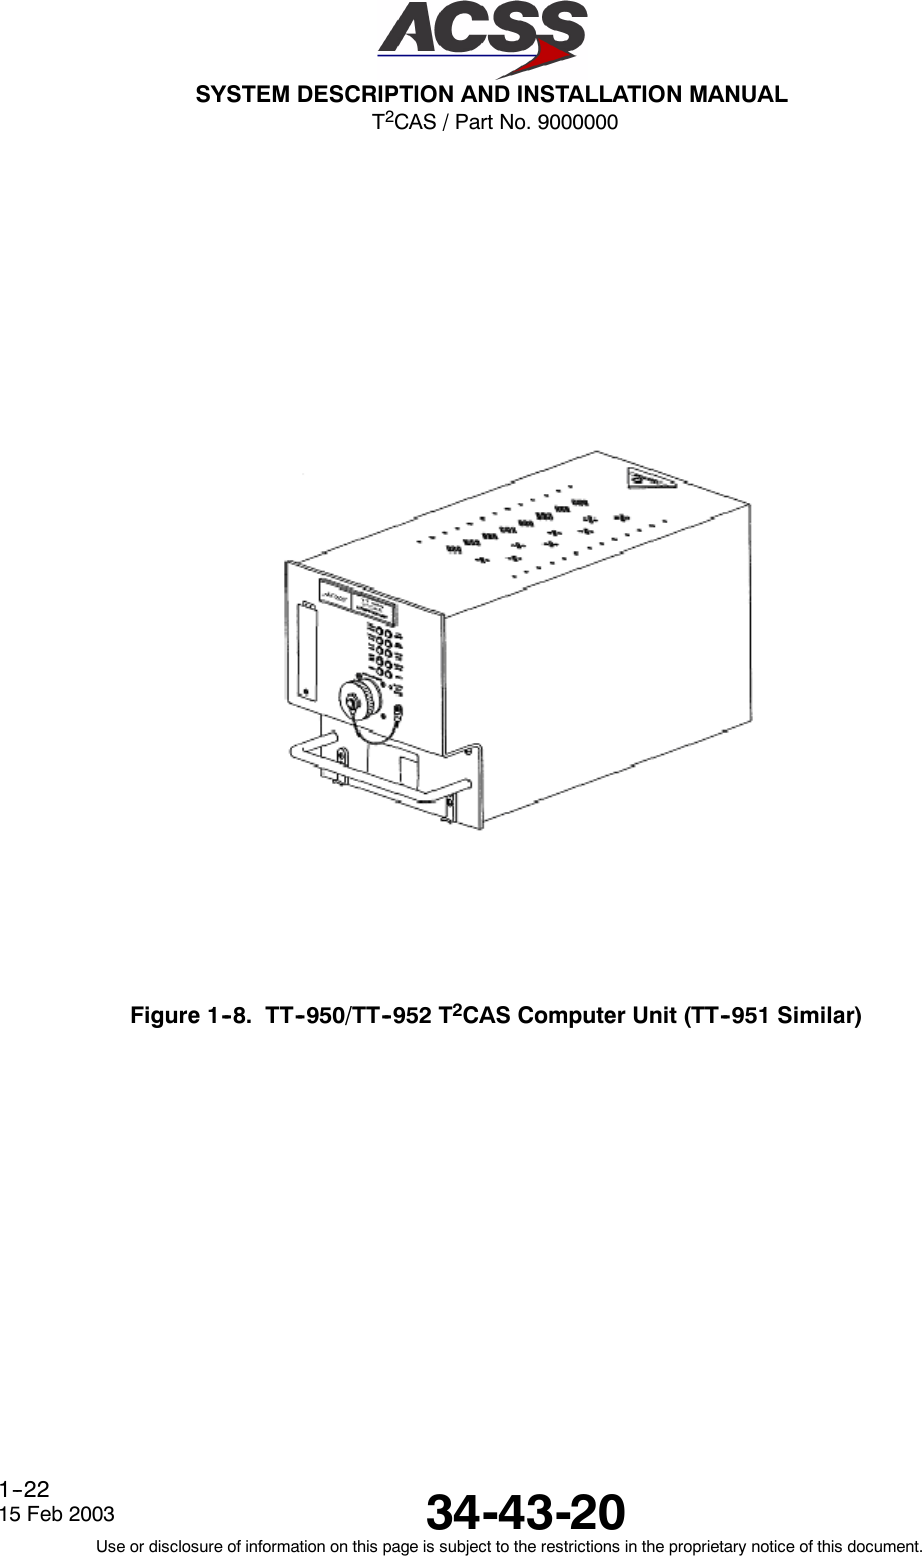 T2CAS / Part No. 9000000SYSTEM DESCRIPTION AND INSTALLATION MANUAL34-43-2015 Feb 2003Use or disclosure of information on this page is subject to the restrictions in the proprietary notice of this document.1--22Figure 1--8. TT--950/TT--952 T2CAS Computer Unit (TT--951 Similar)